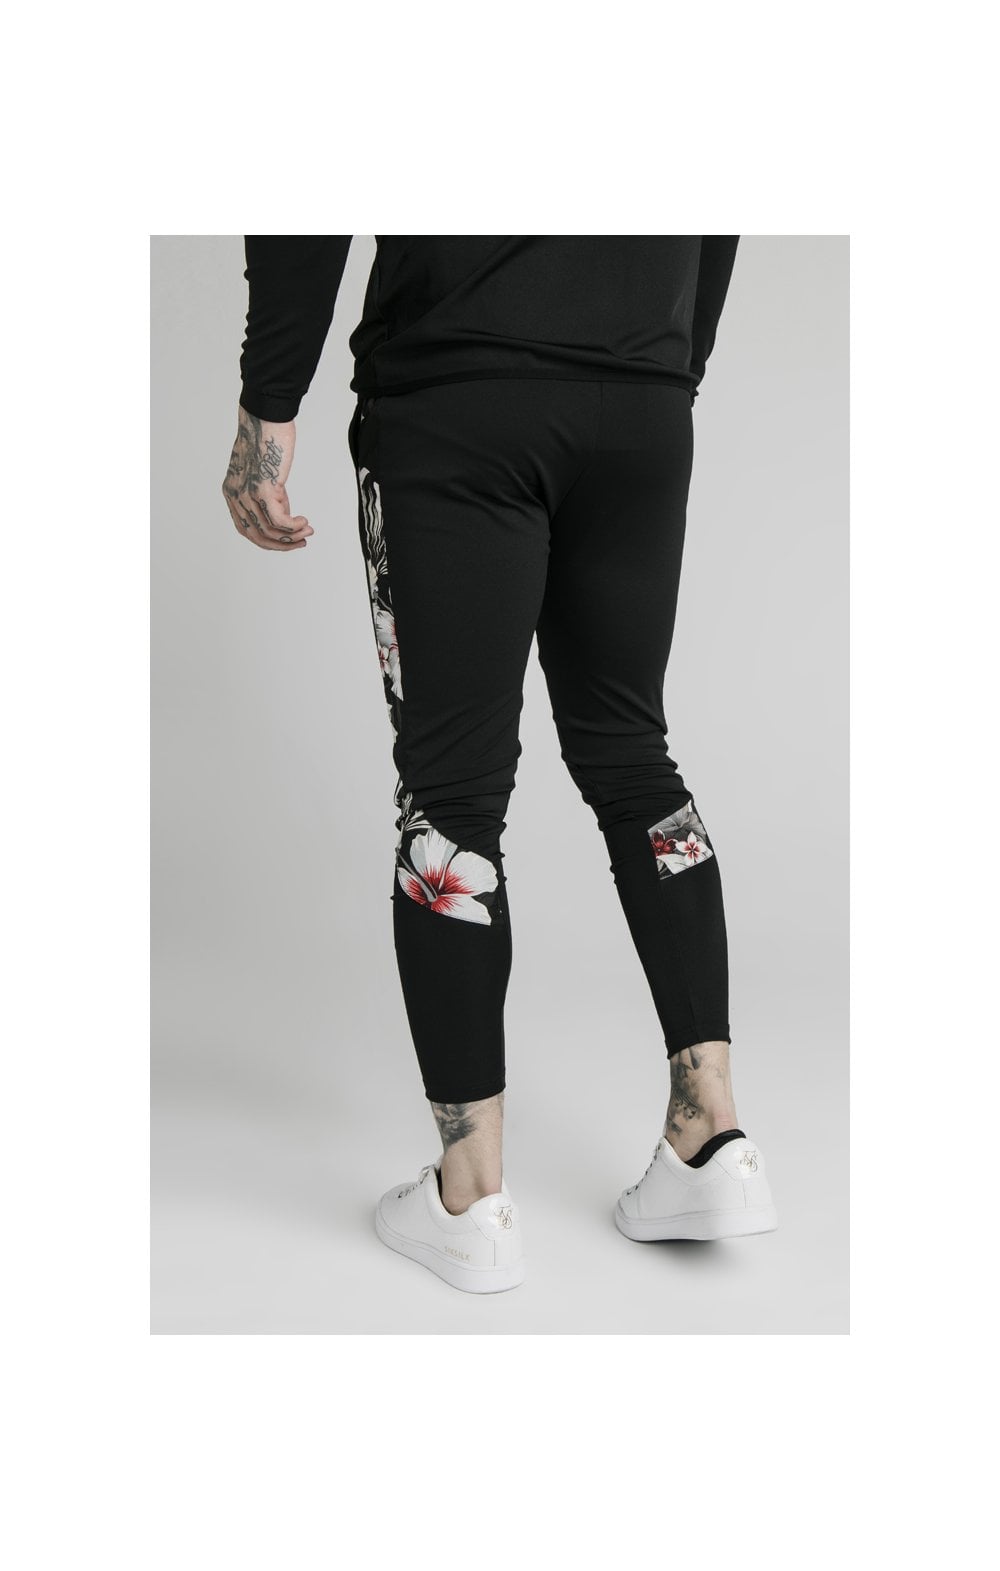 Load image into Gallery viewer, SikSilk Scope Floral Panel Track Pants - Black (2)